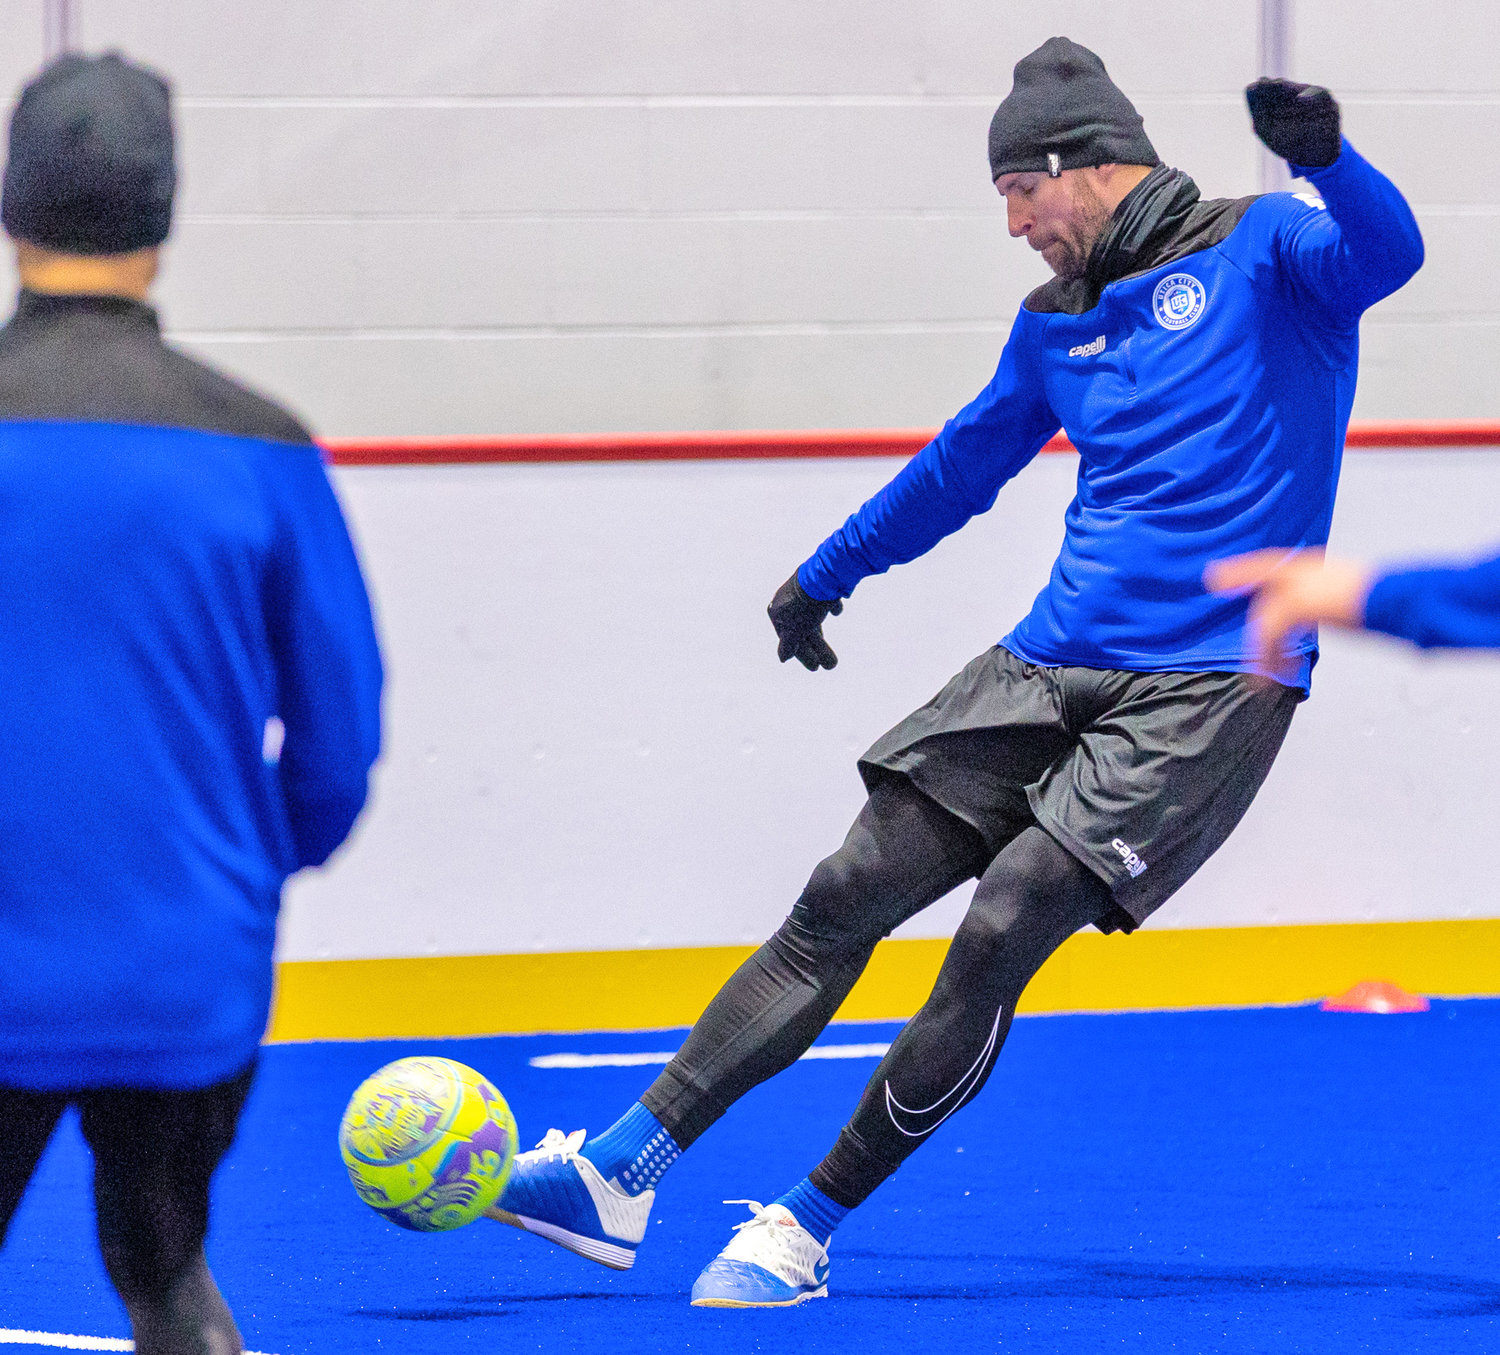 Bo Jelovac takes a shot in practice earlier this week for Utica City FC.